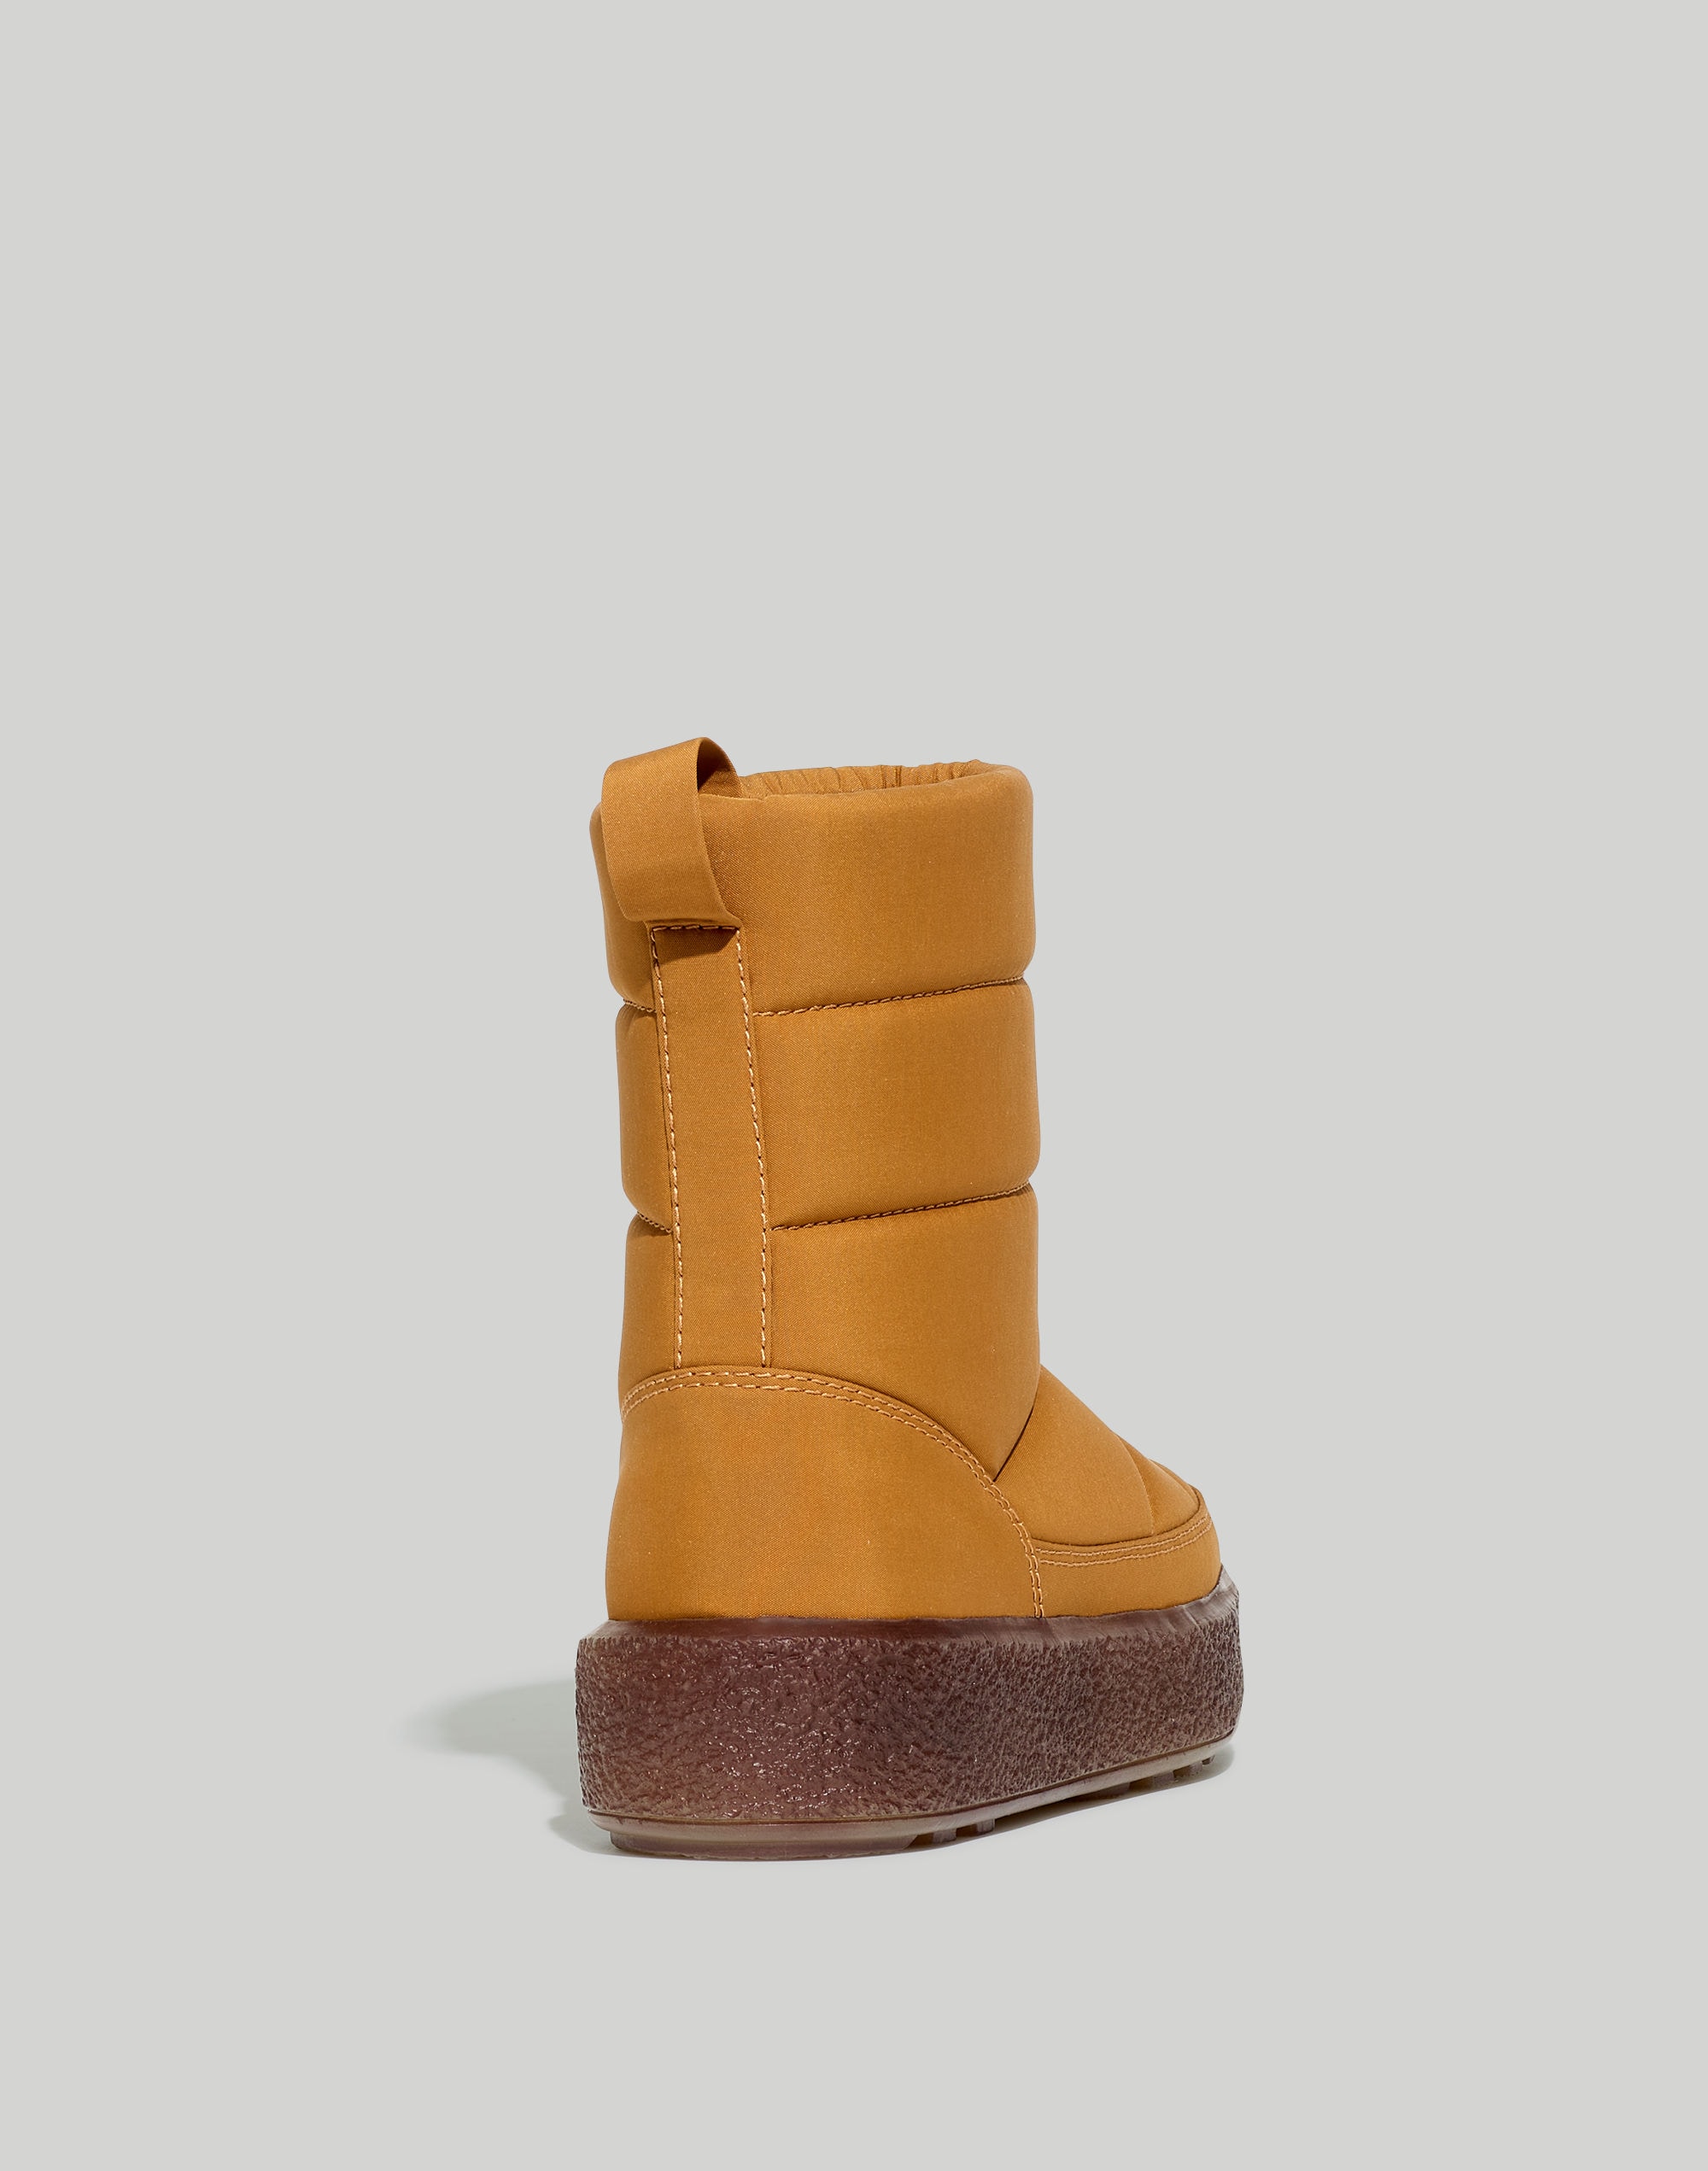 The Toasty Puffer Boot